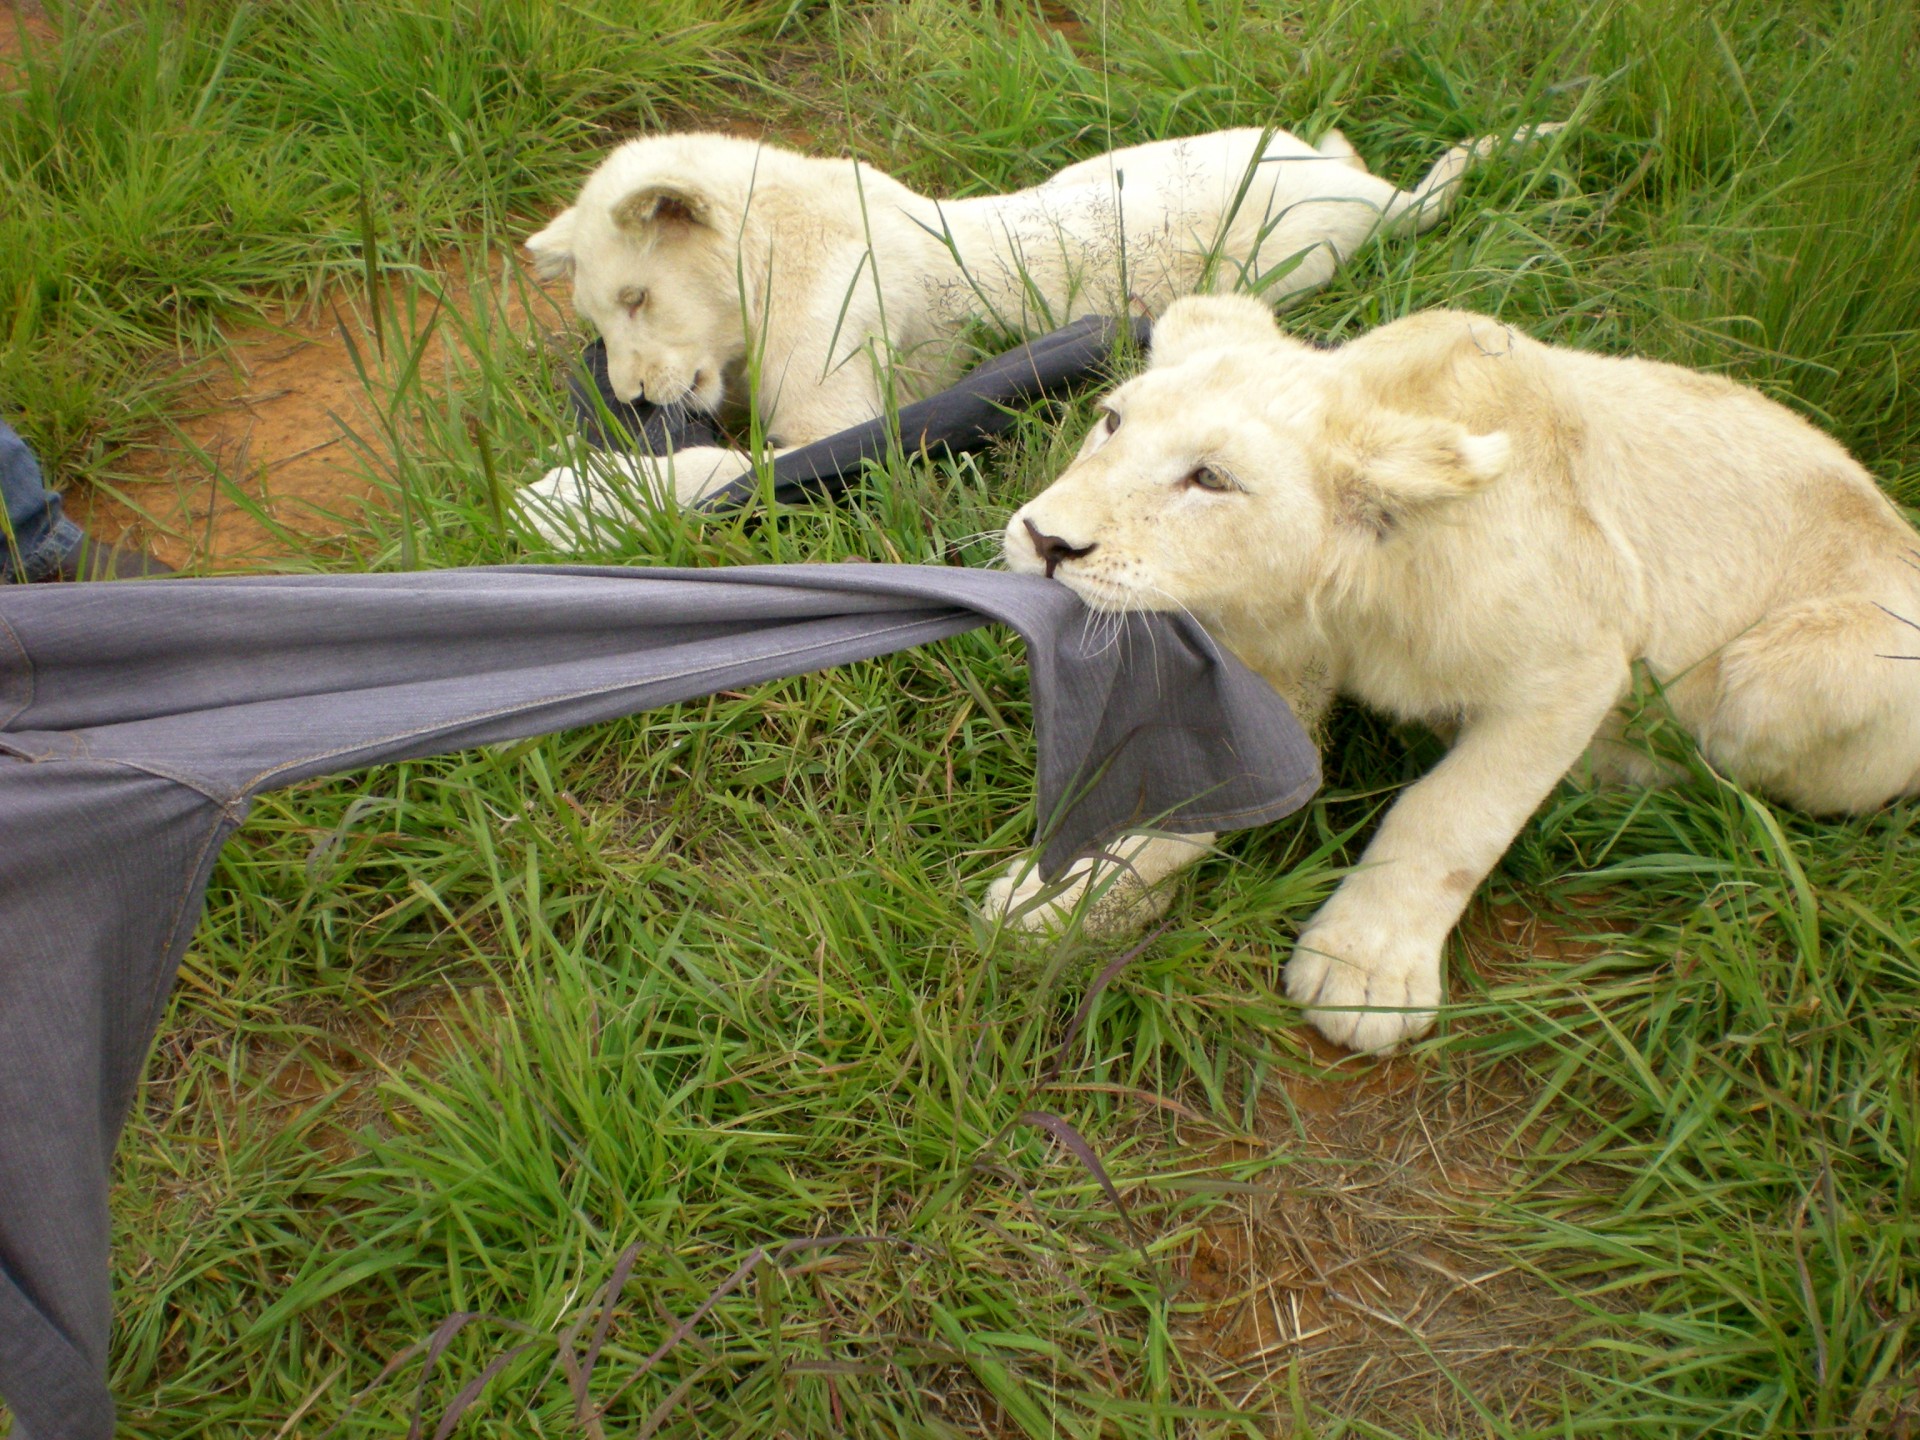 Two white lion cubs pulling on a pair of jeans